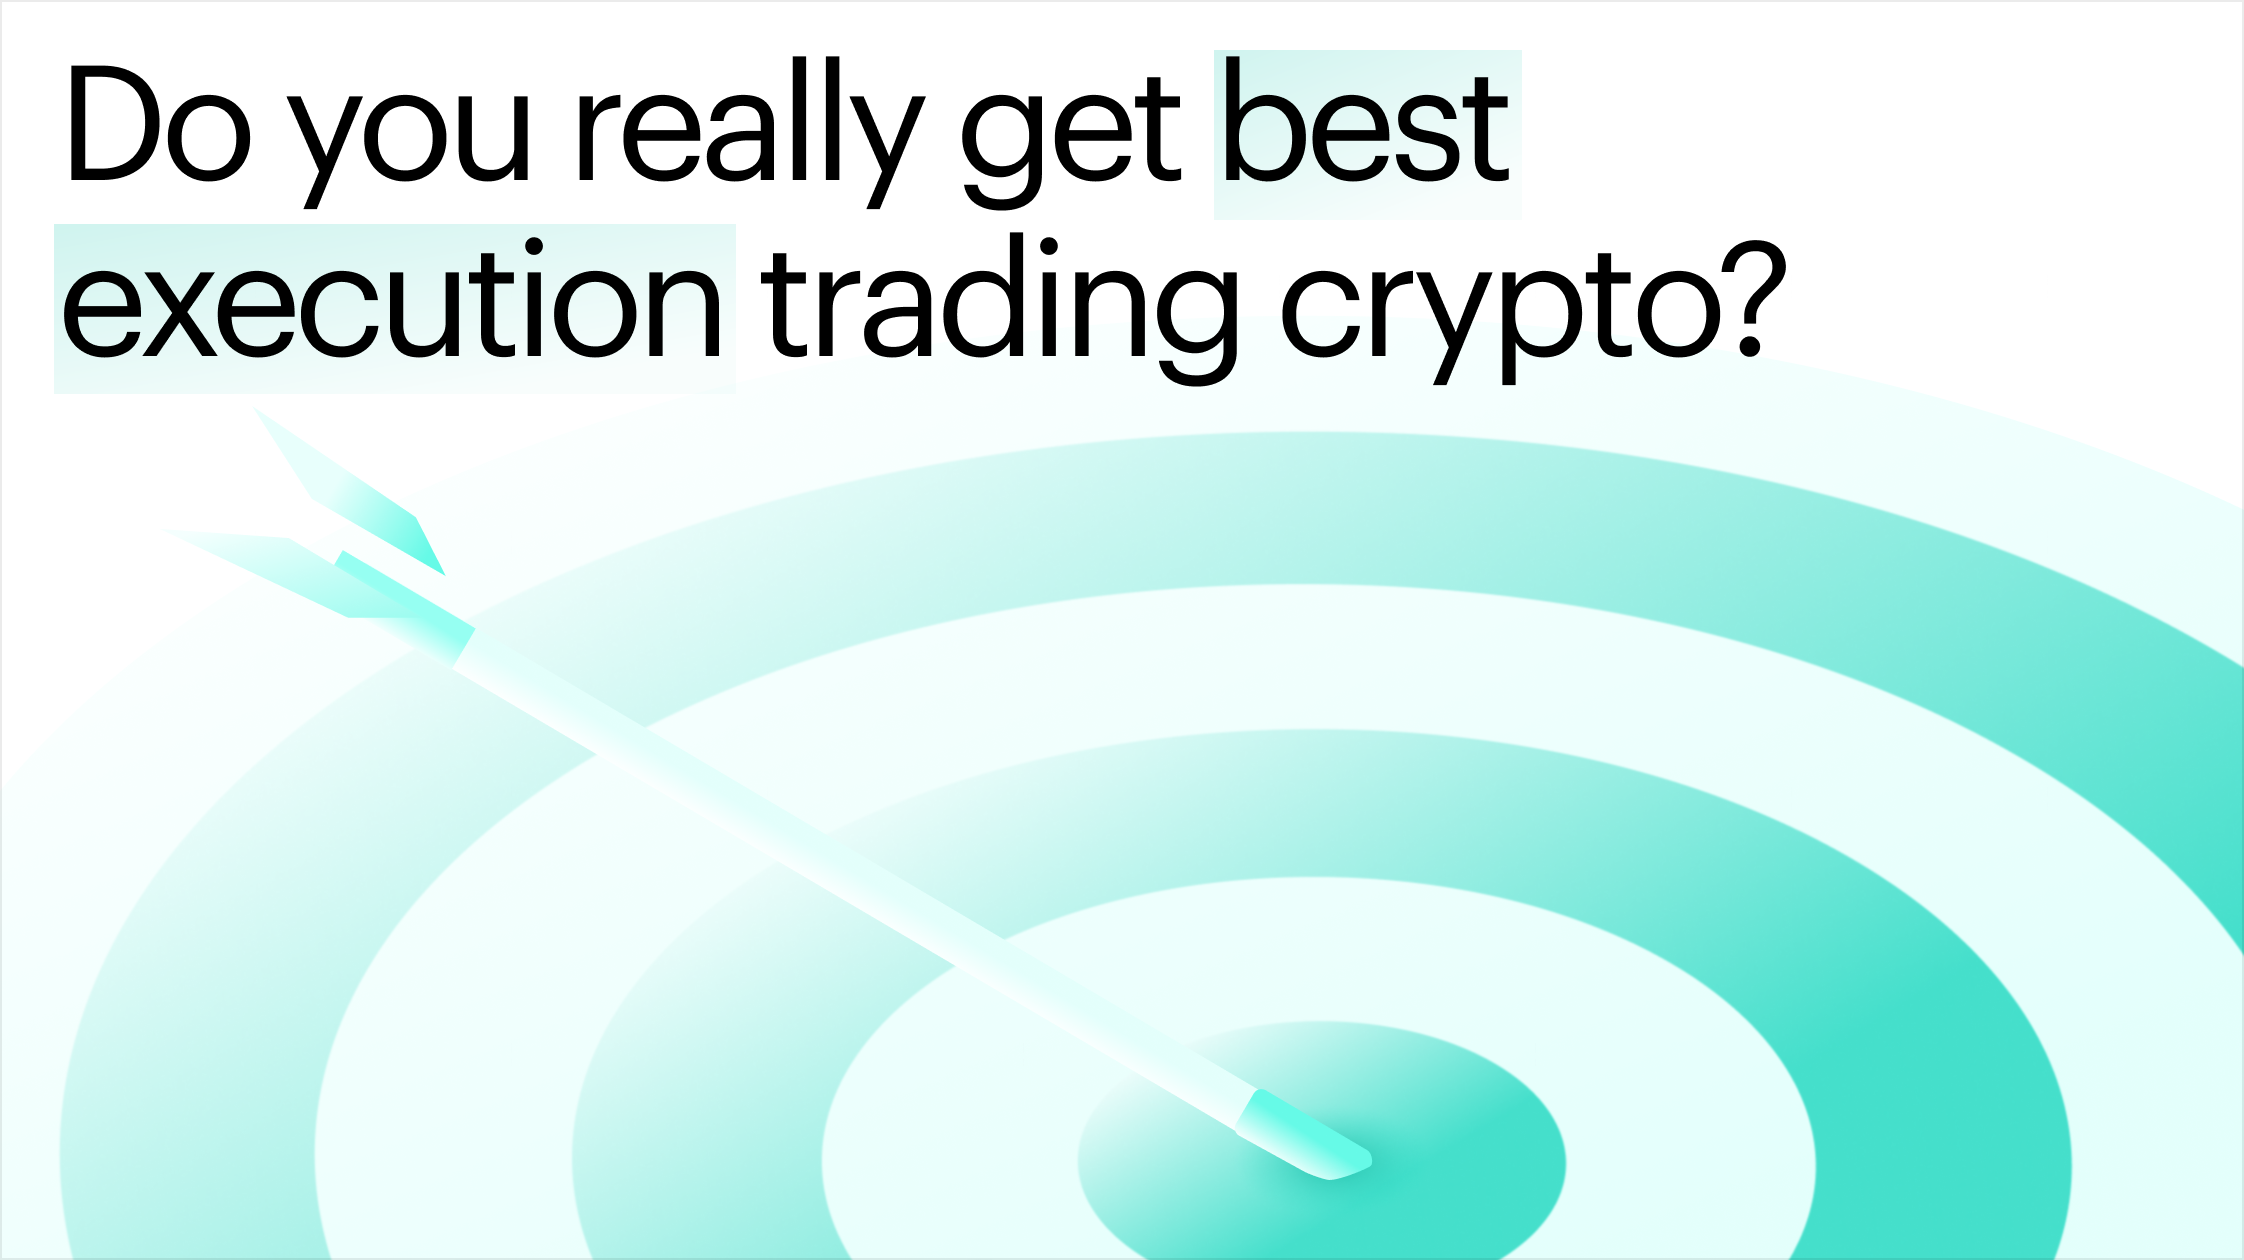 Why should institutions understand what "last look" means in crypto trading?